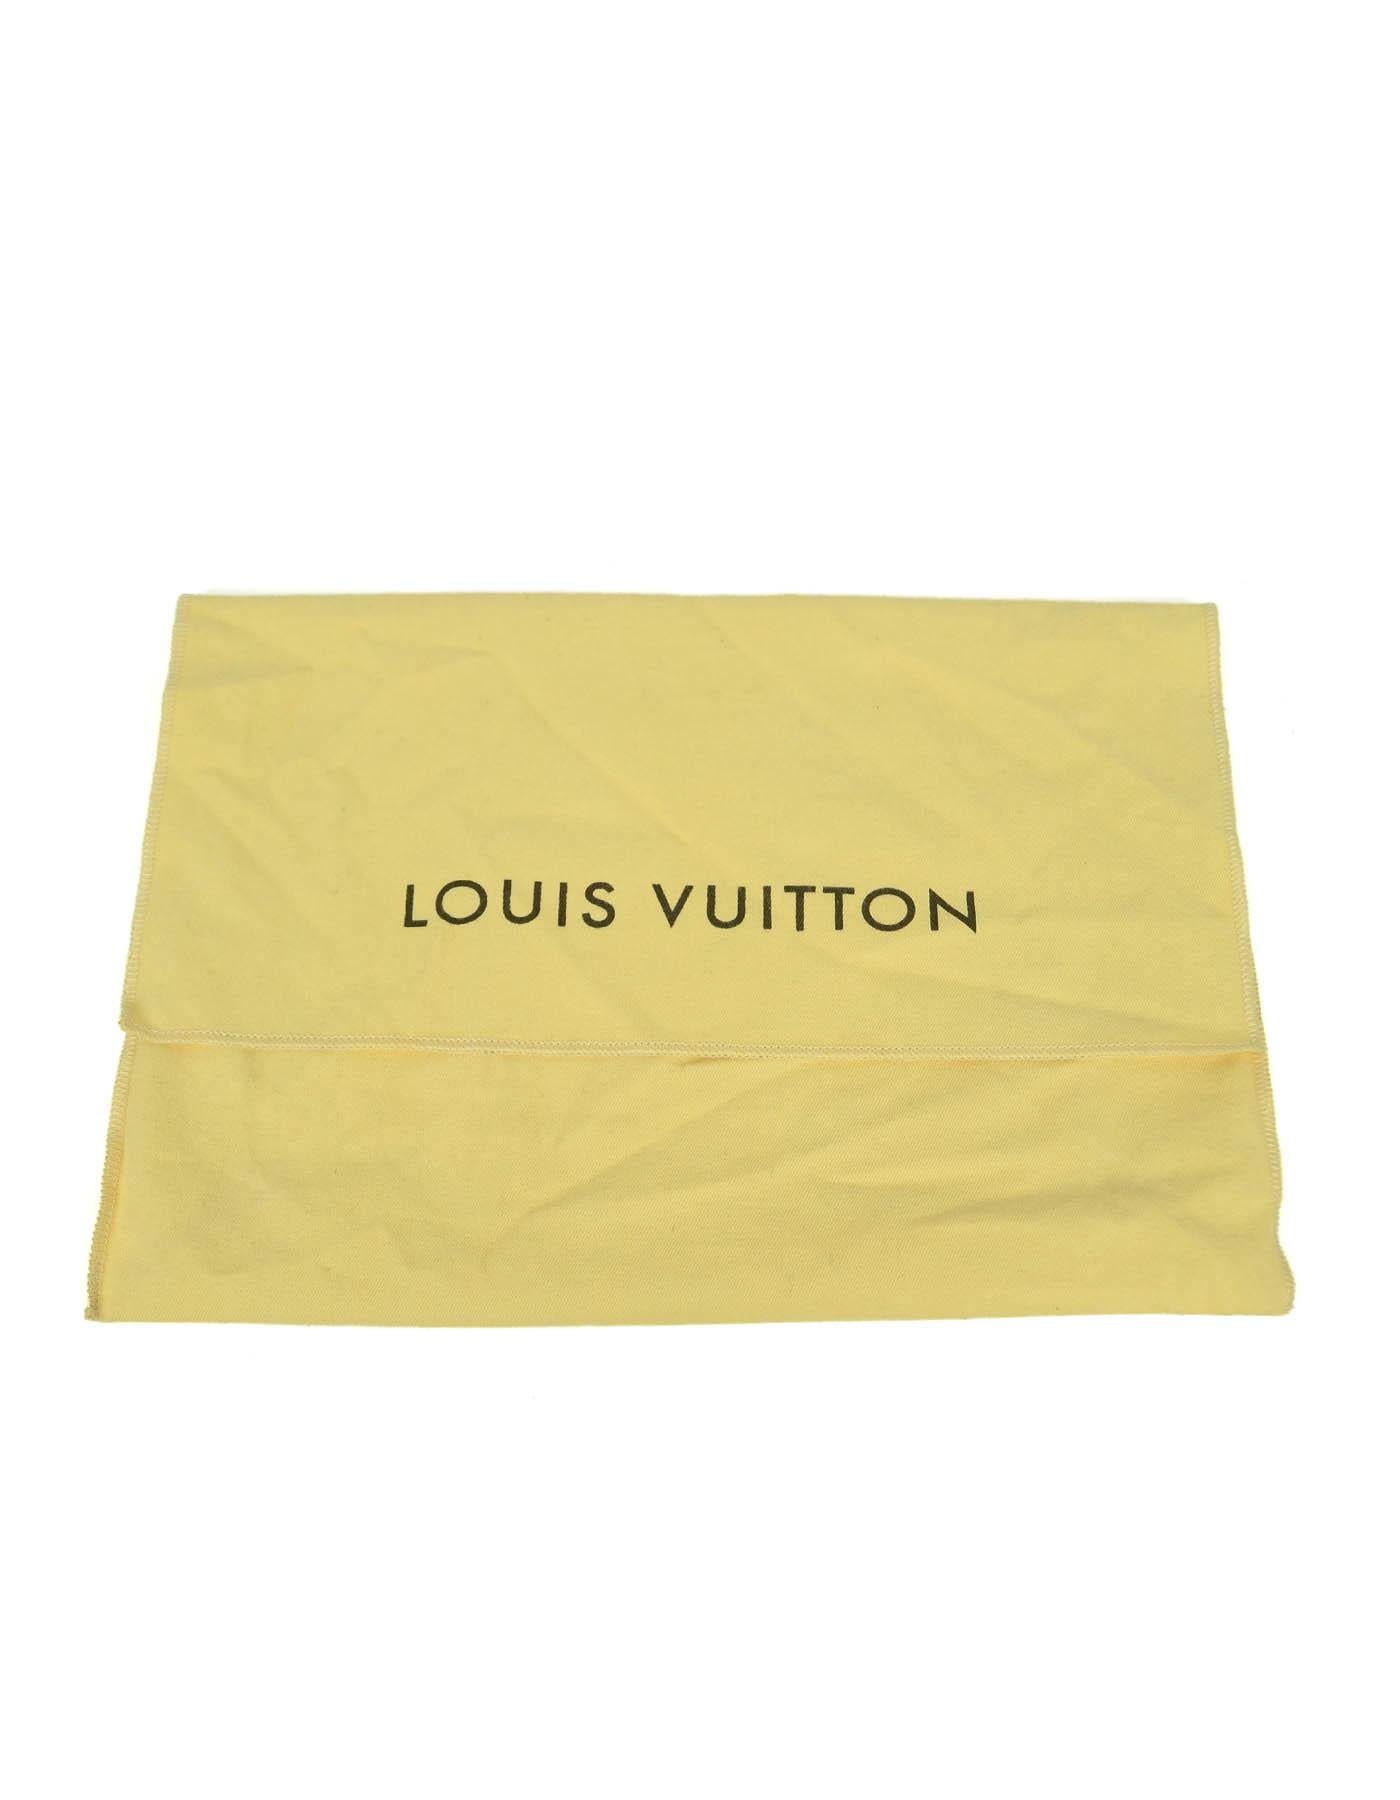 Louis Vuitton SOLD OUT Monogram Coated Canvas Toiletry 26 Pouch/Clutch Bag 4